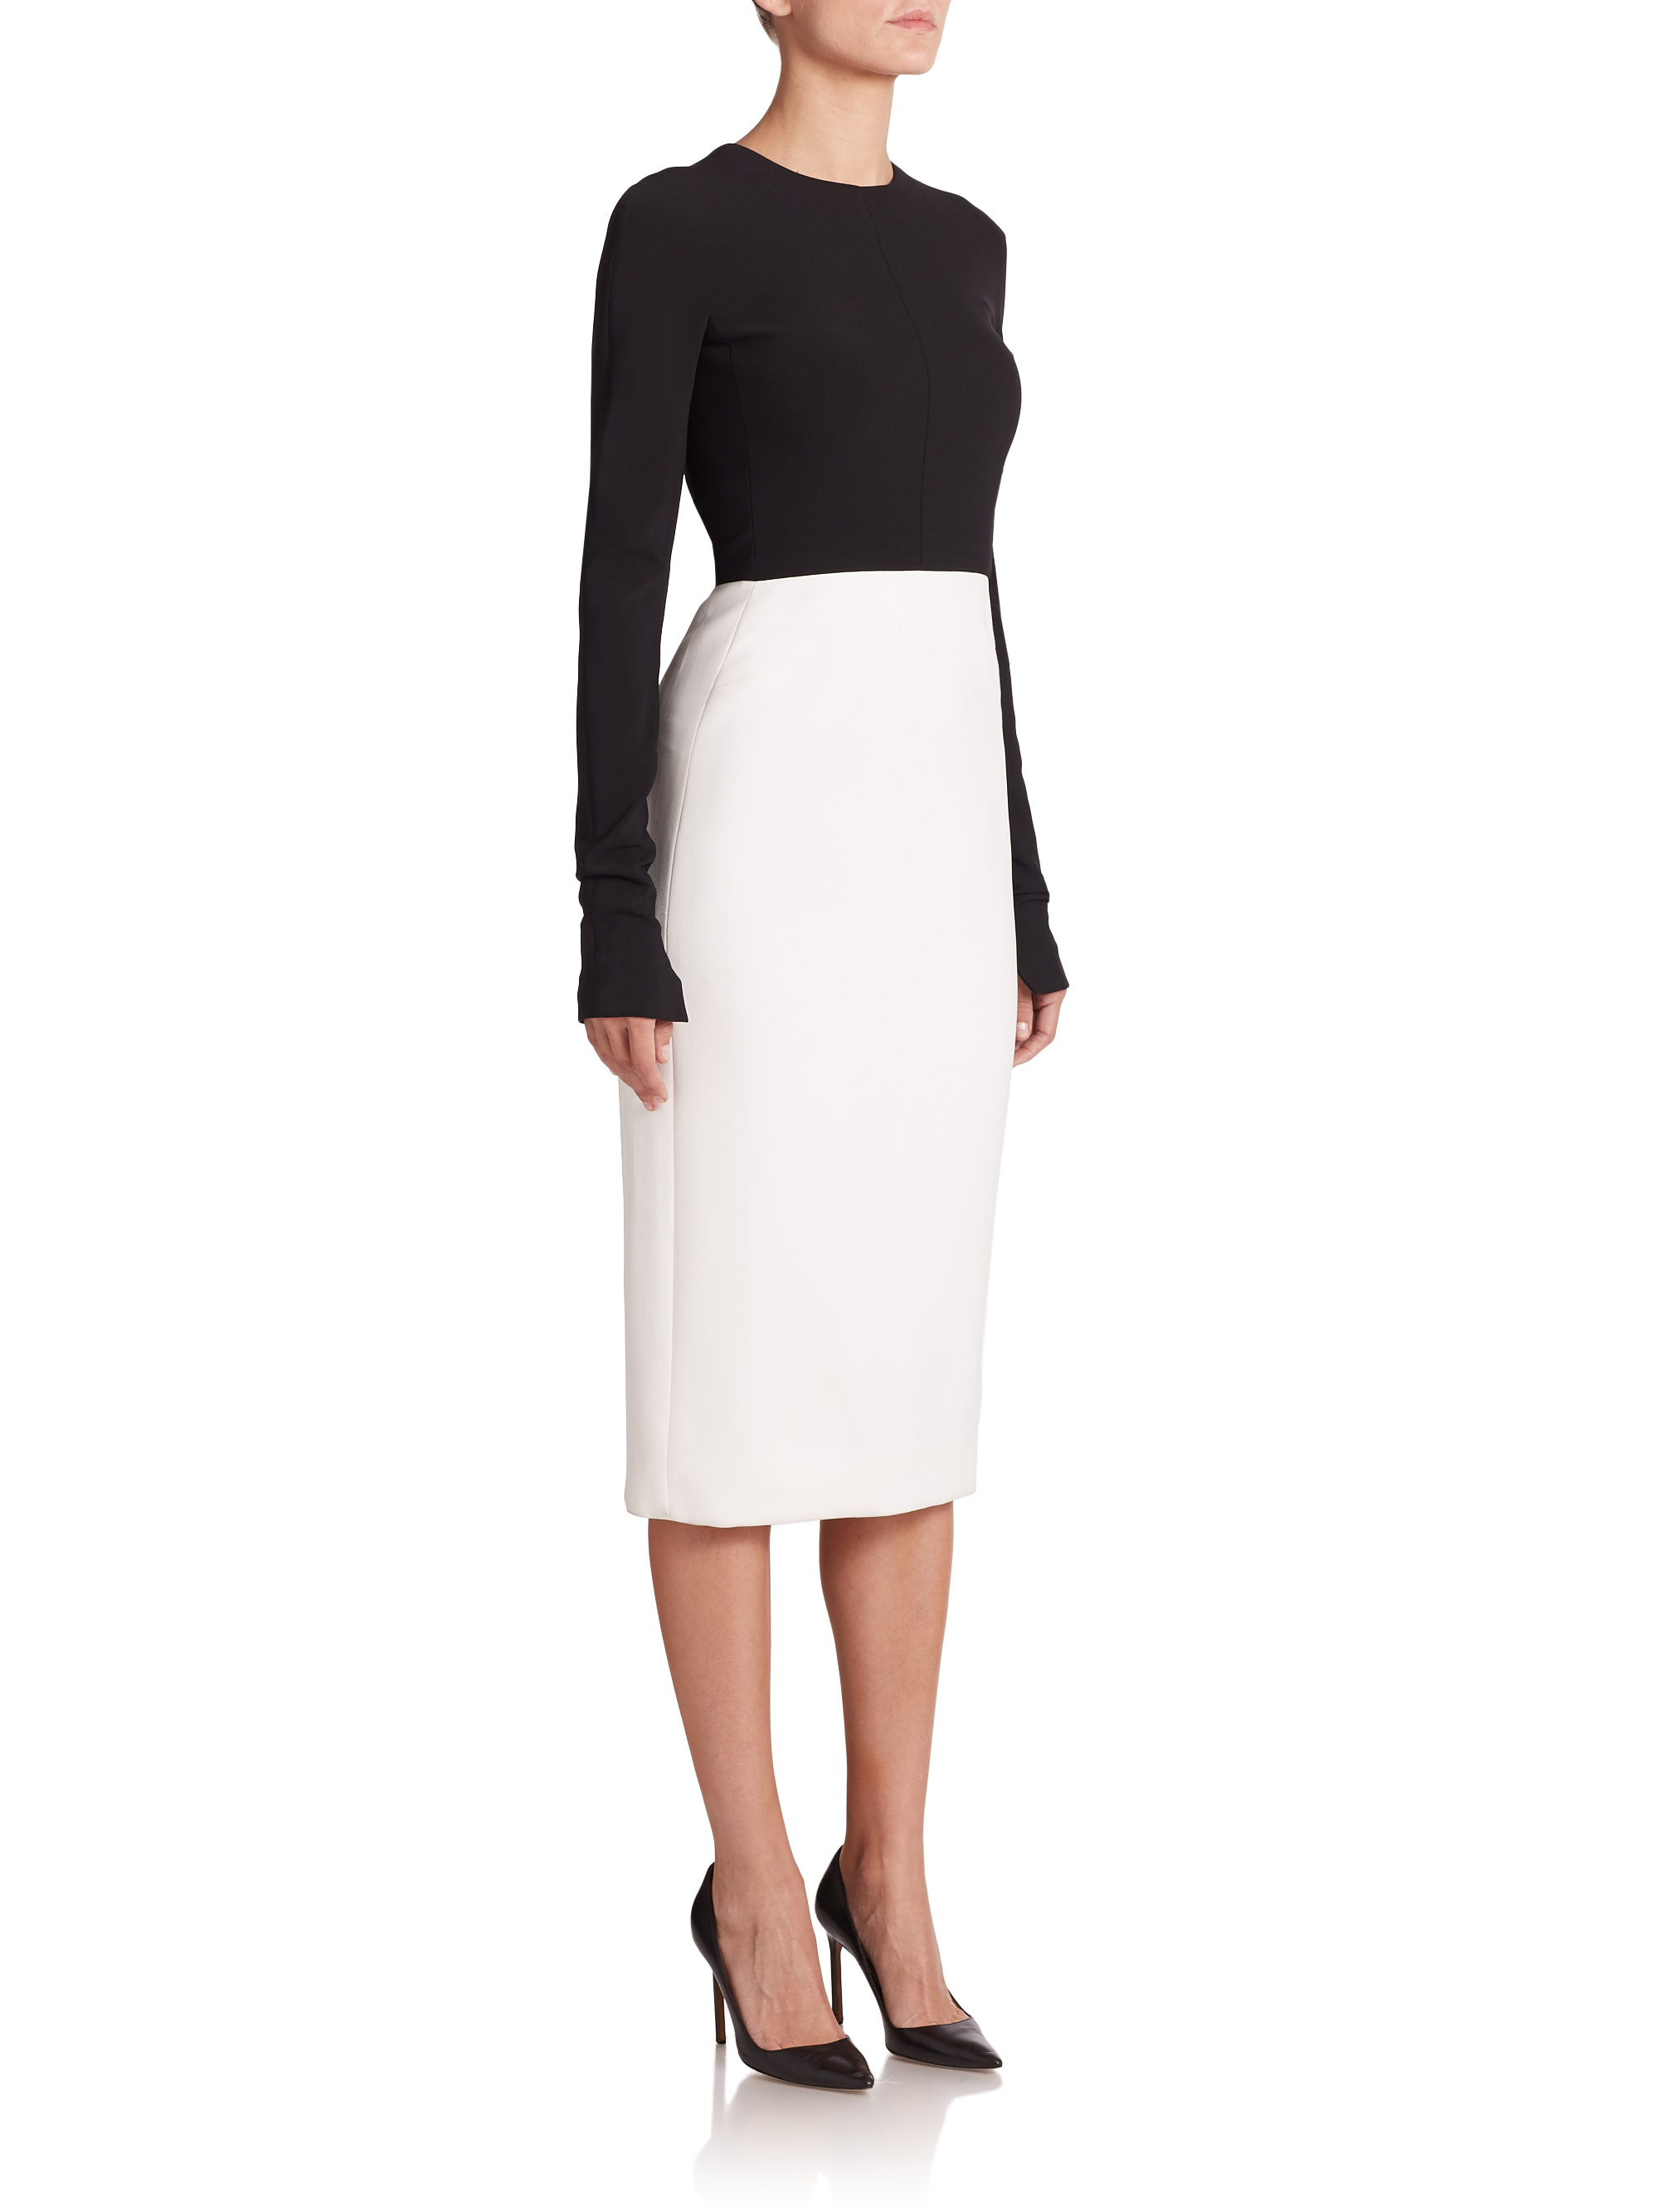 Lyst - Narciso Rodriguez Scuba Crepe Long-sleeve Fitted Dress in Black